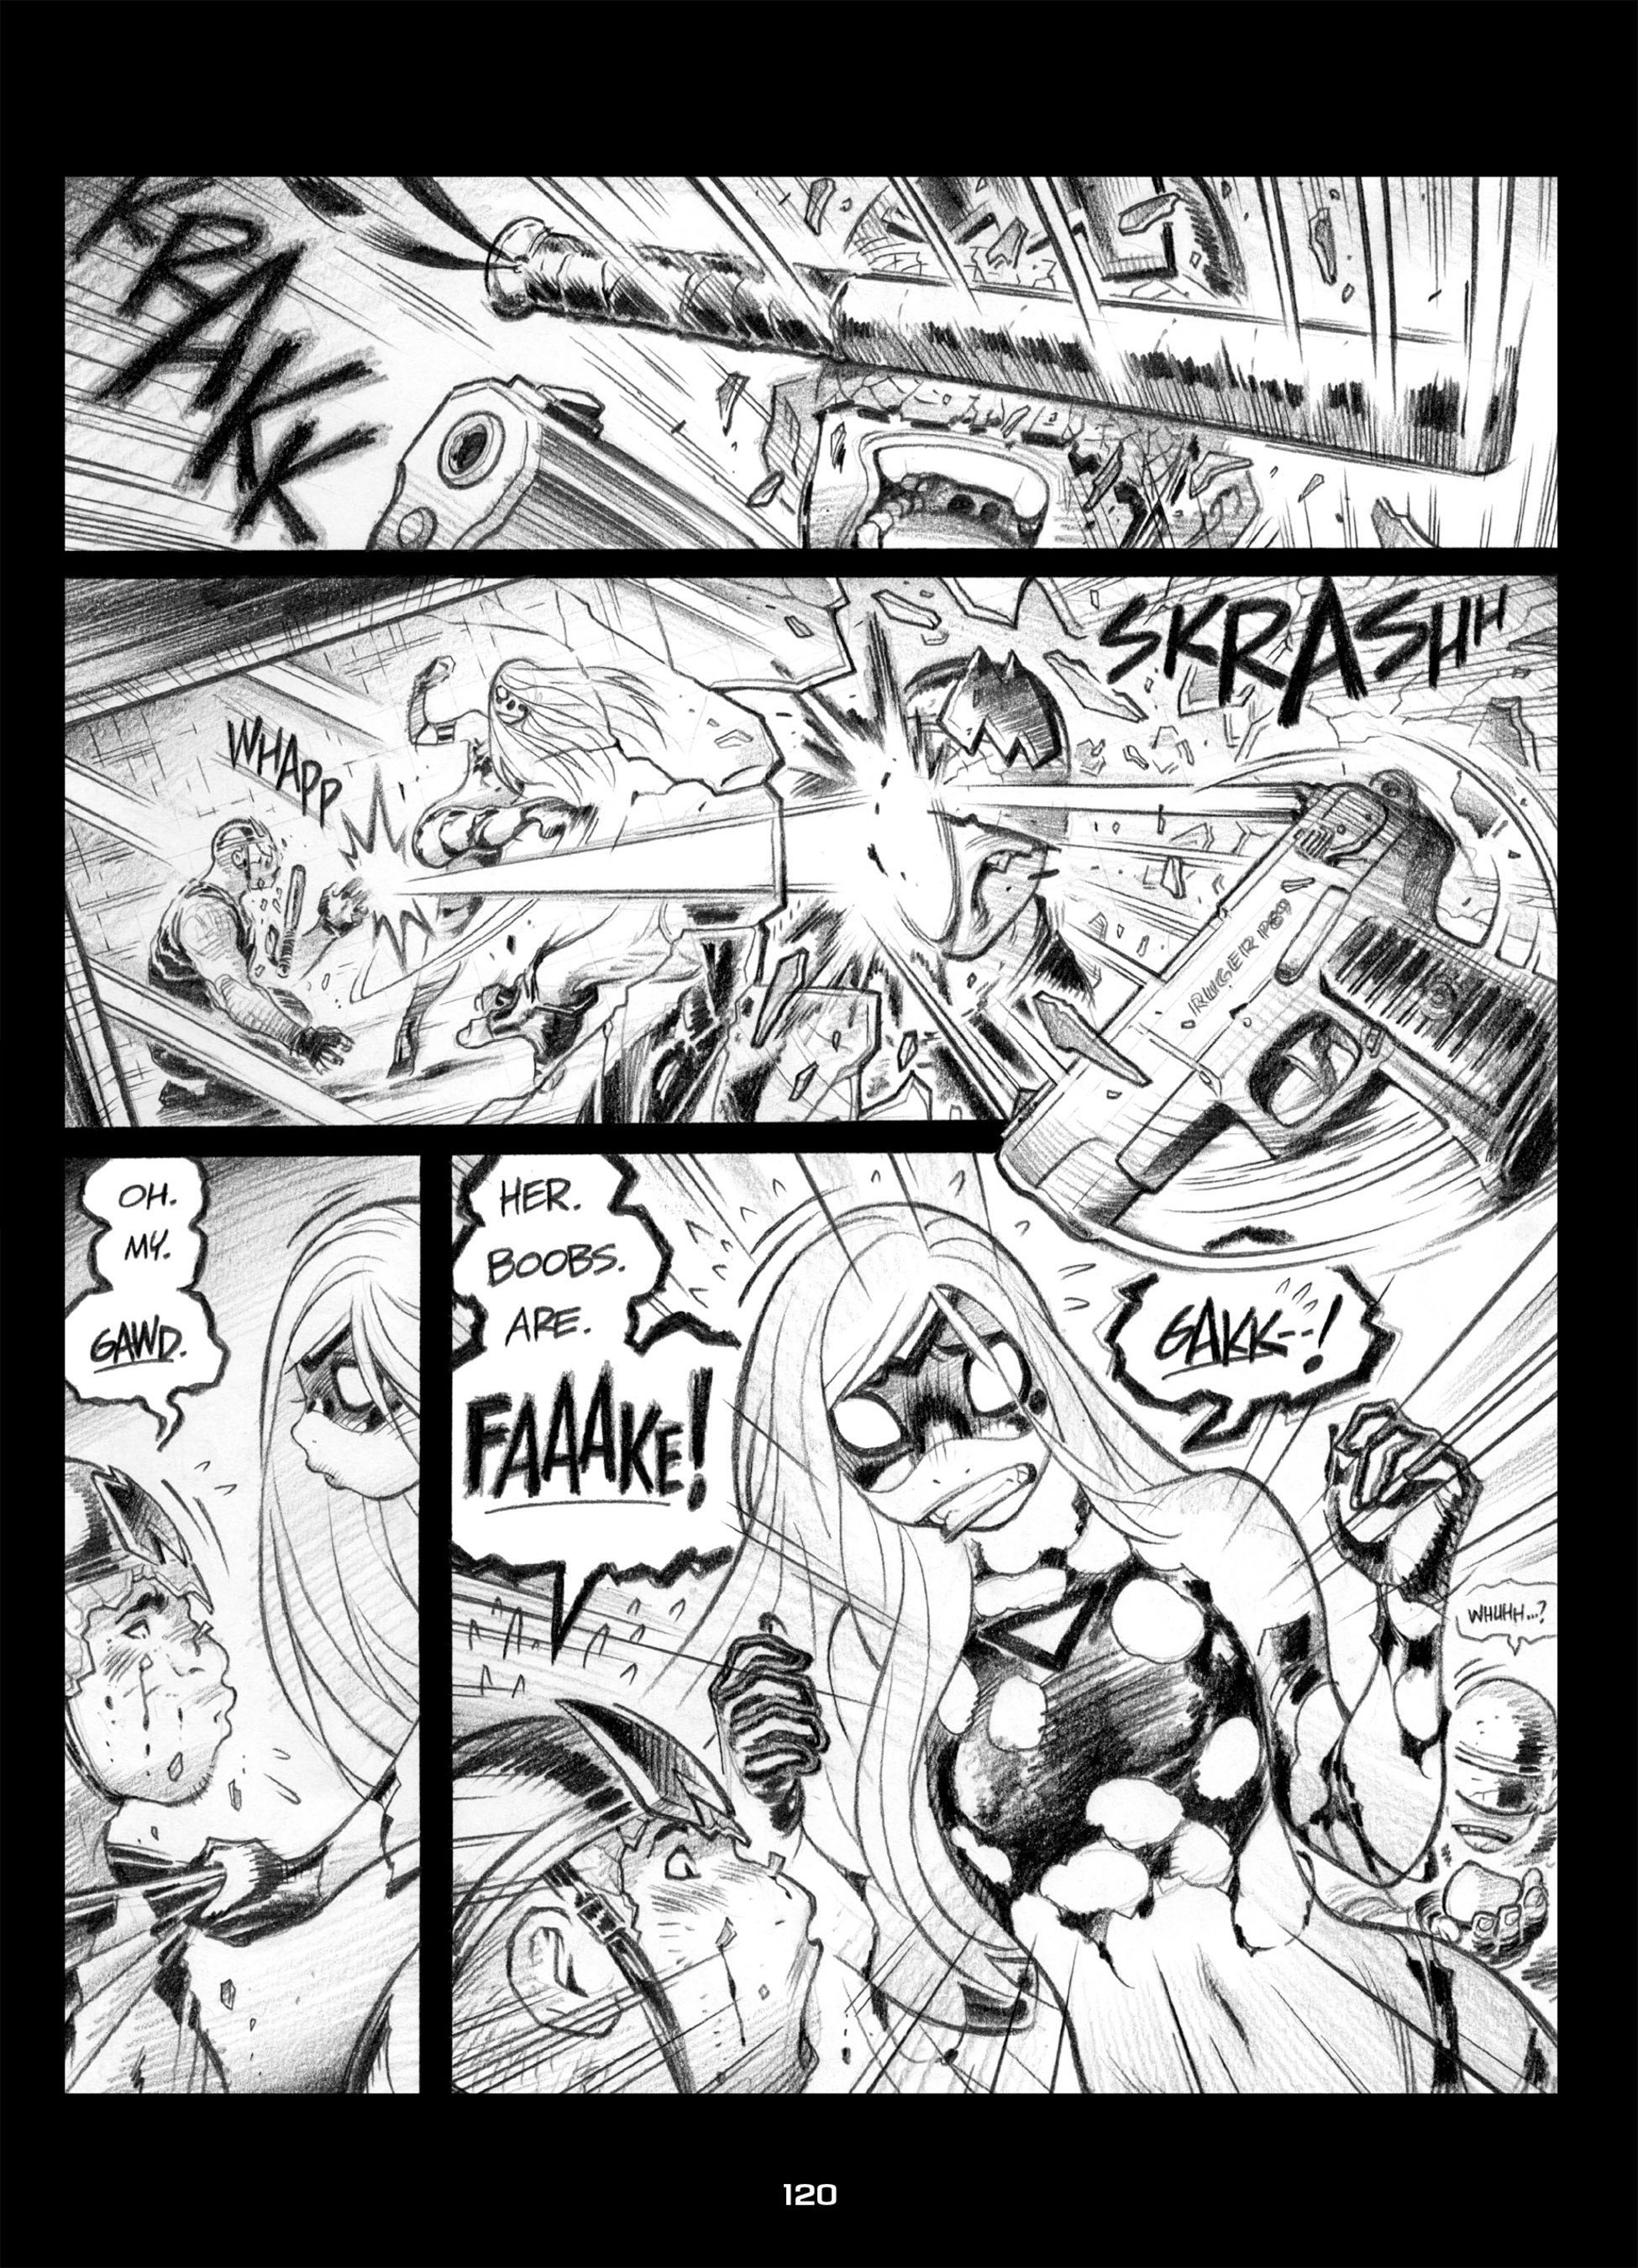 Read online Empowered comic -  Issue #2 - 120